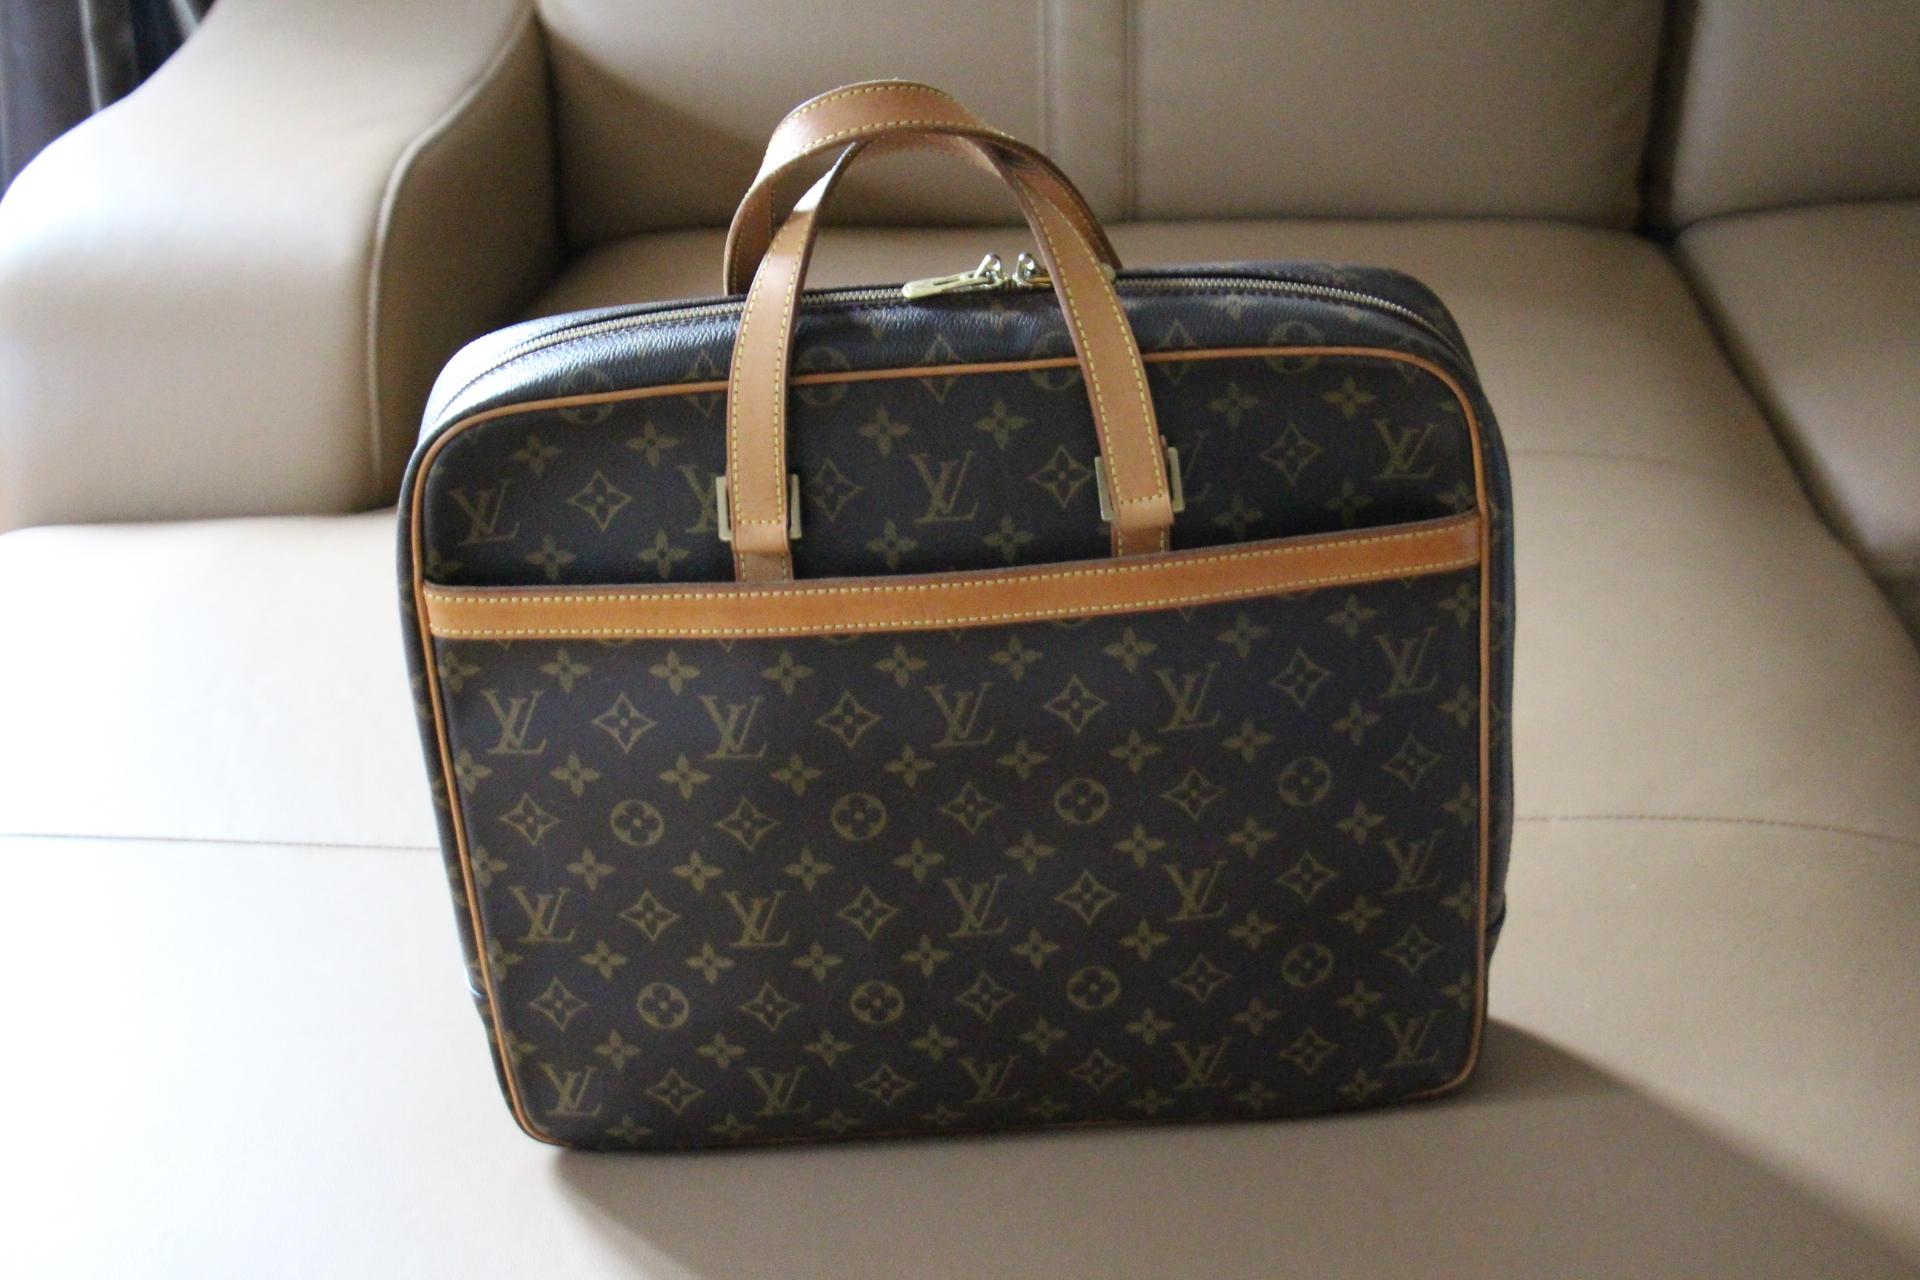  This Louis Vuitton Briefcase bag features Louis Vuitton monogram and cowhide leather, dual leather top handles and two-way zip closures at top. II also features one flat pocket by side.
Its interior is brown canvas with 2 flat pockets on one side